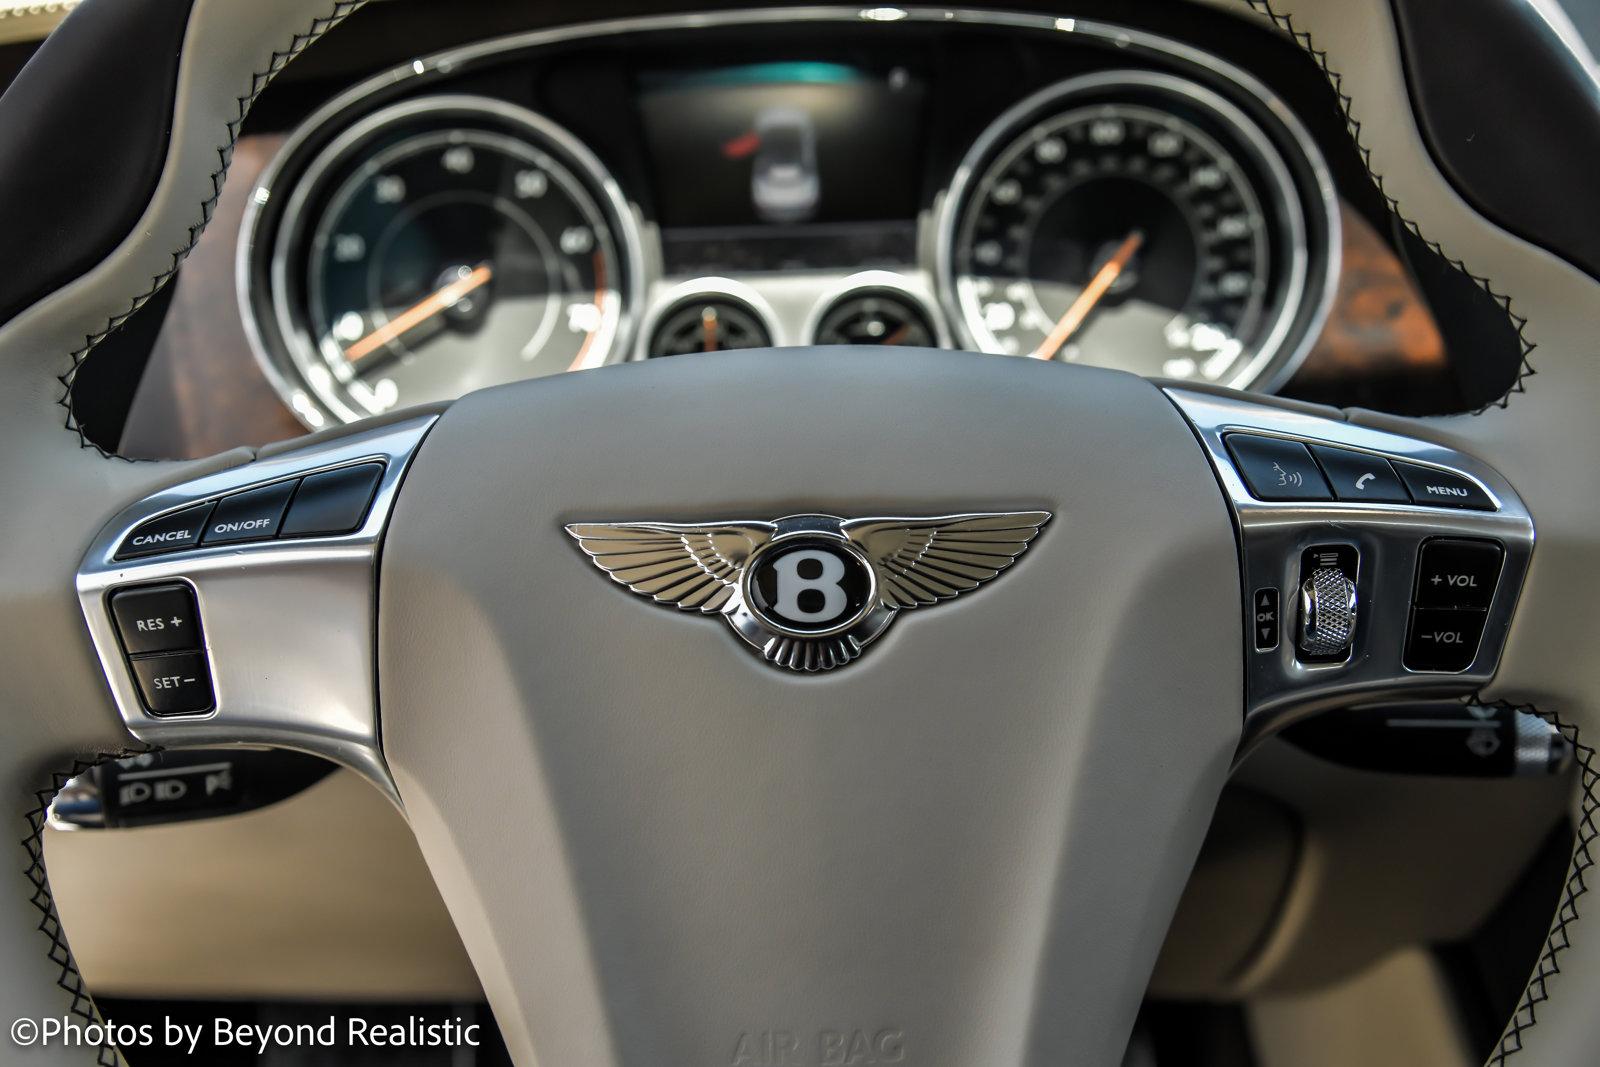 Used 2016 Bentley Continental GT W12, Mulliner | Downers Grove, IL